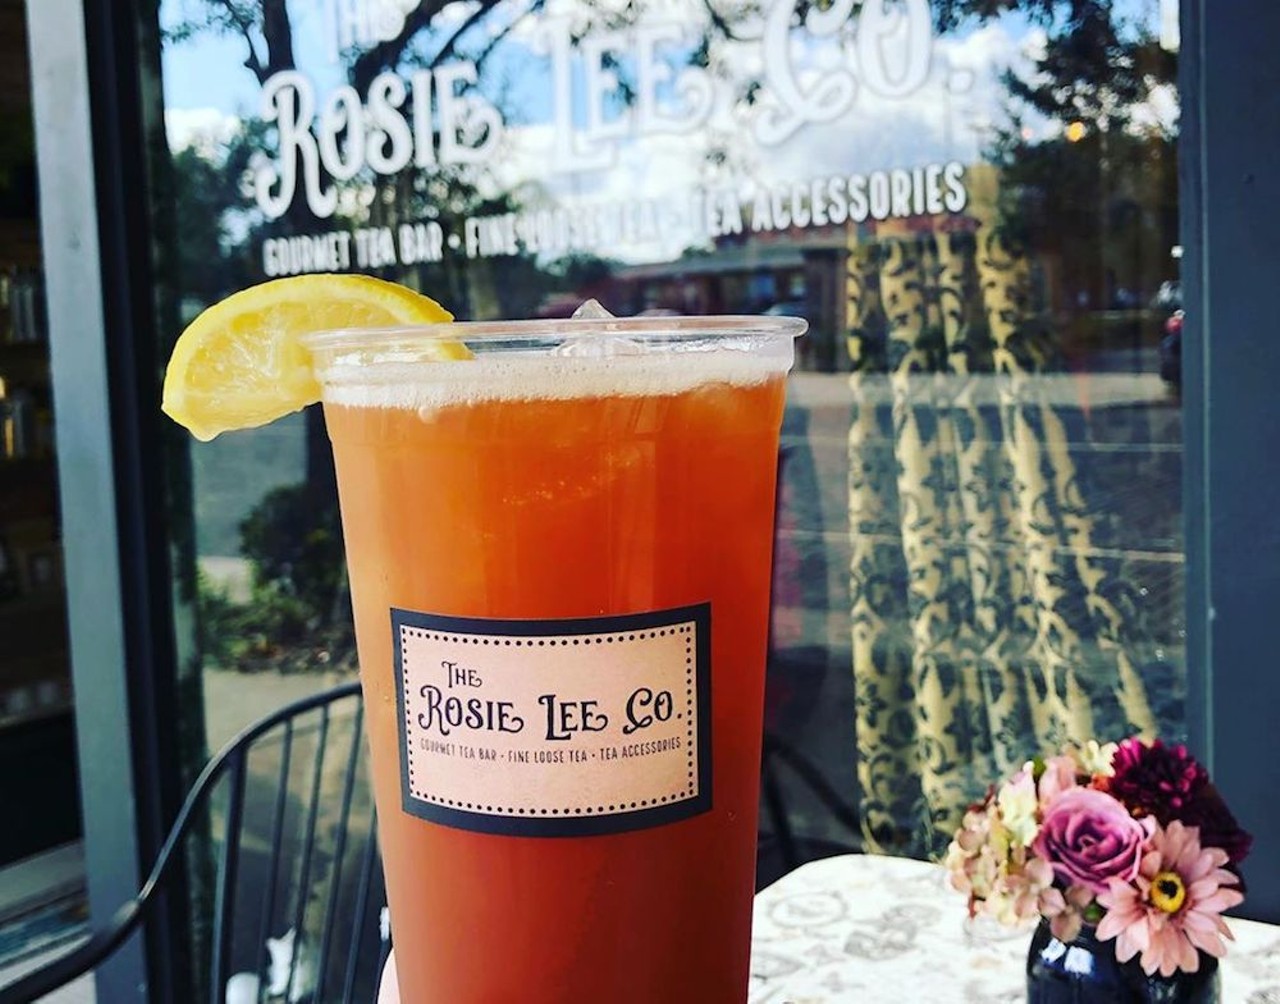 The Rosie Lee Co. 
108 S. Park Avenue Sanford, FL 32771, 321-315-1370
The Rosie Lee Co. is open for carry out or online orders only until further notice. They will be operating at a new temporary schedule on Fridays, Saturdays & Sundays from 11 a.m. to 3 p.m. The tea restaurant offers a variety of specialty teas, coffee, and desserts.  
Photo via The Rosie Lee Co./Facebook